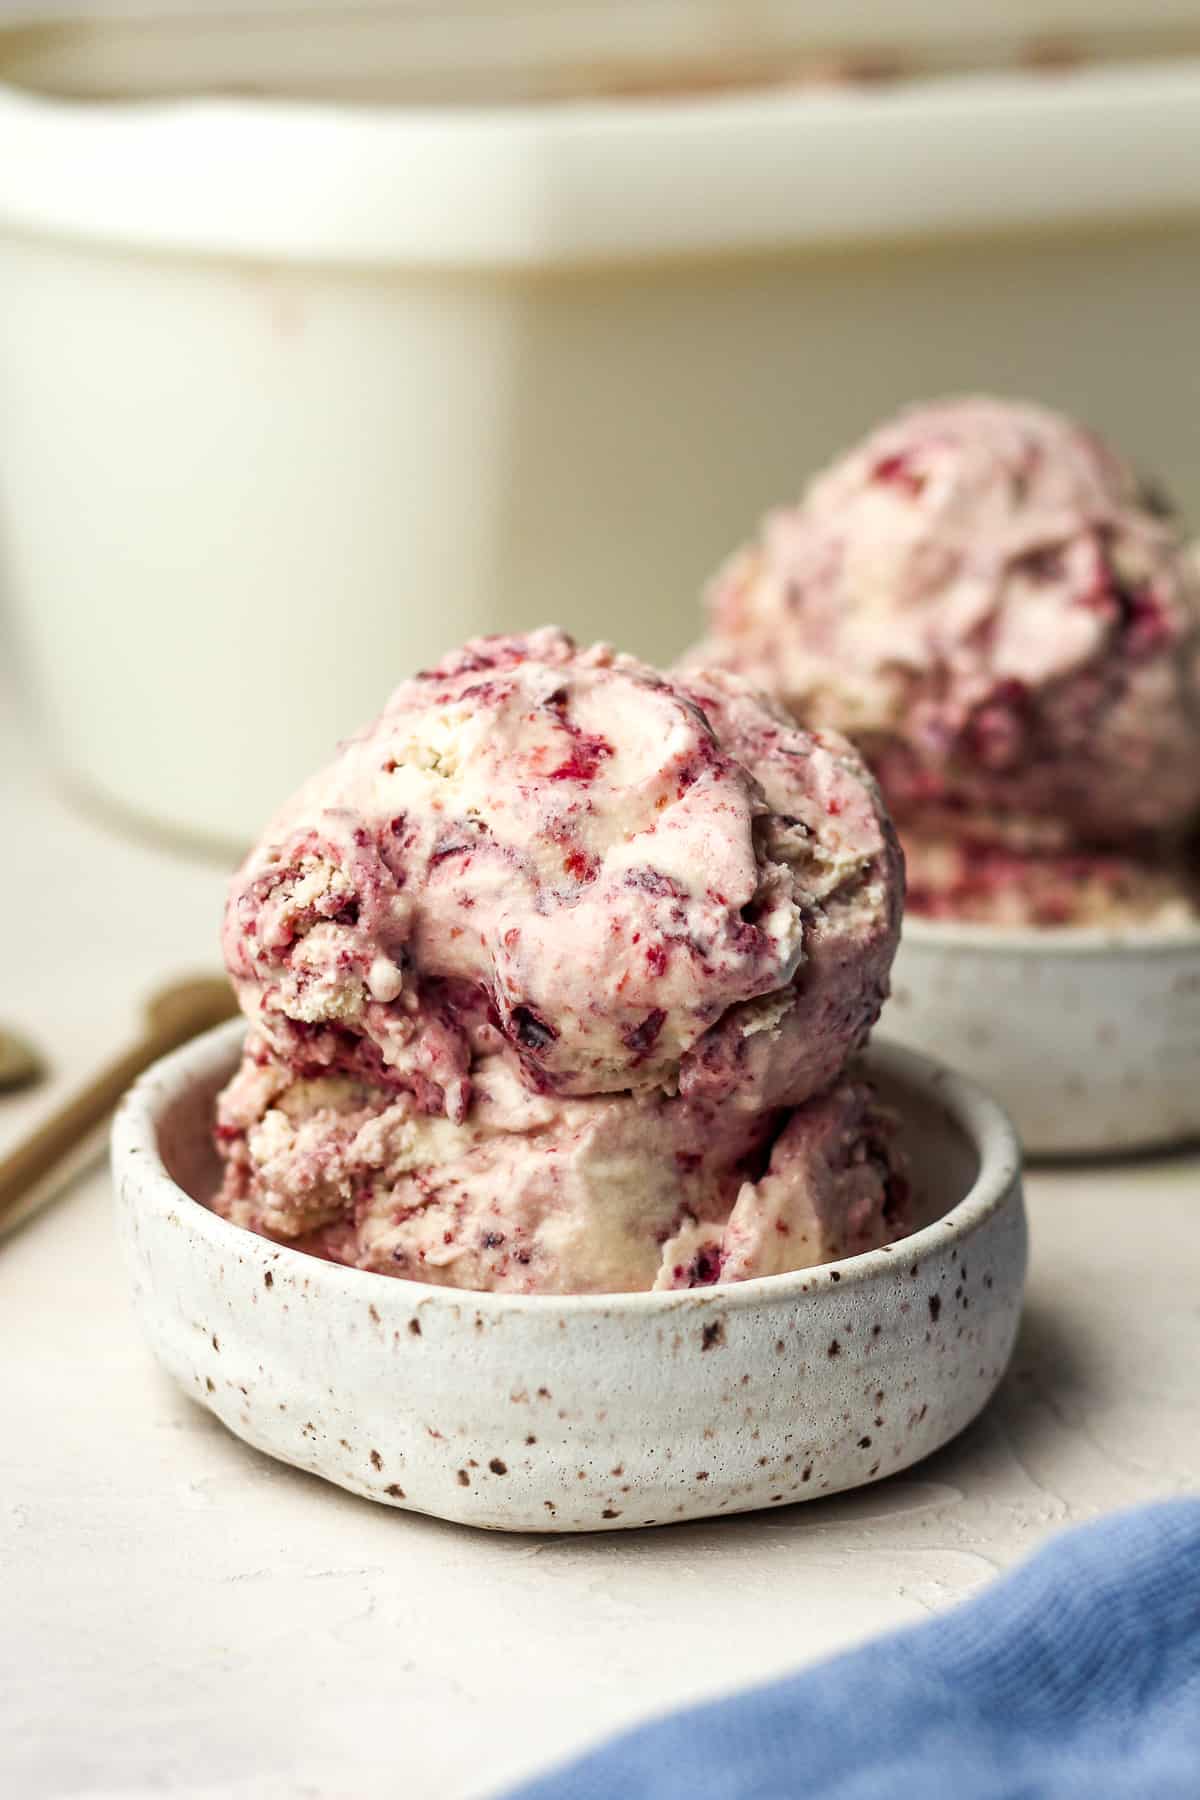 Side view of two small bowls of cherry ice cream.